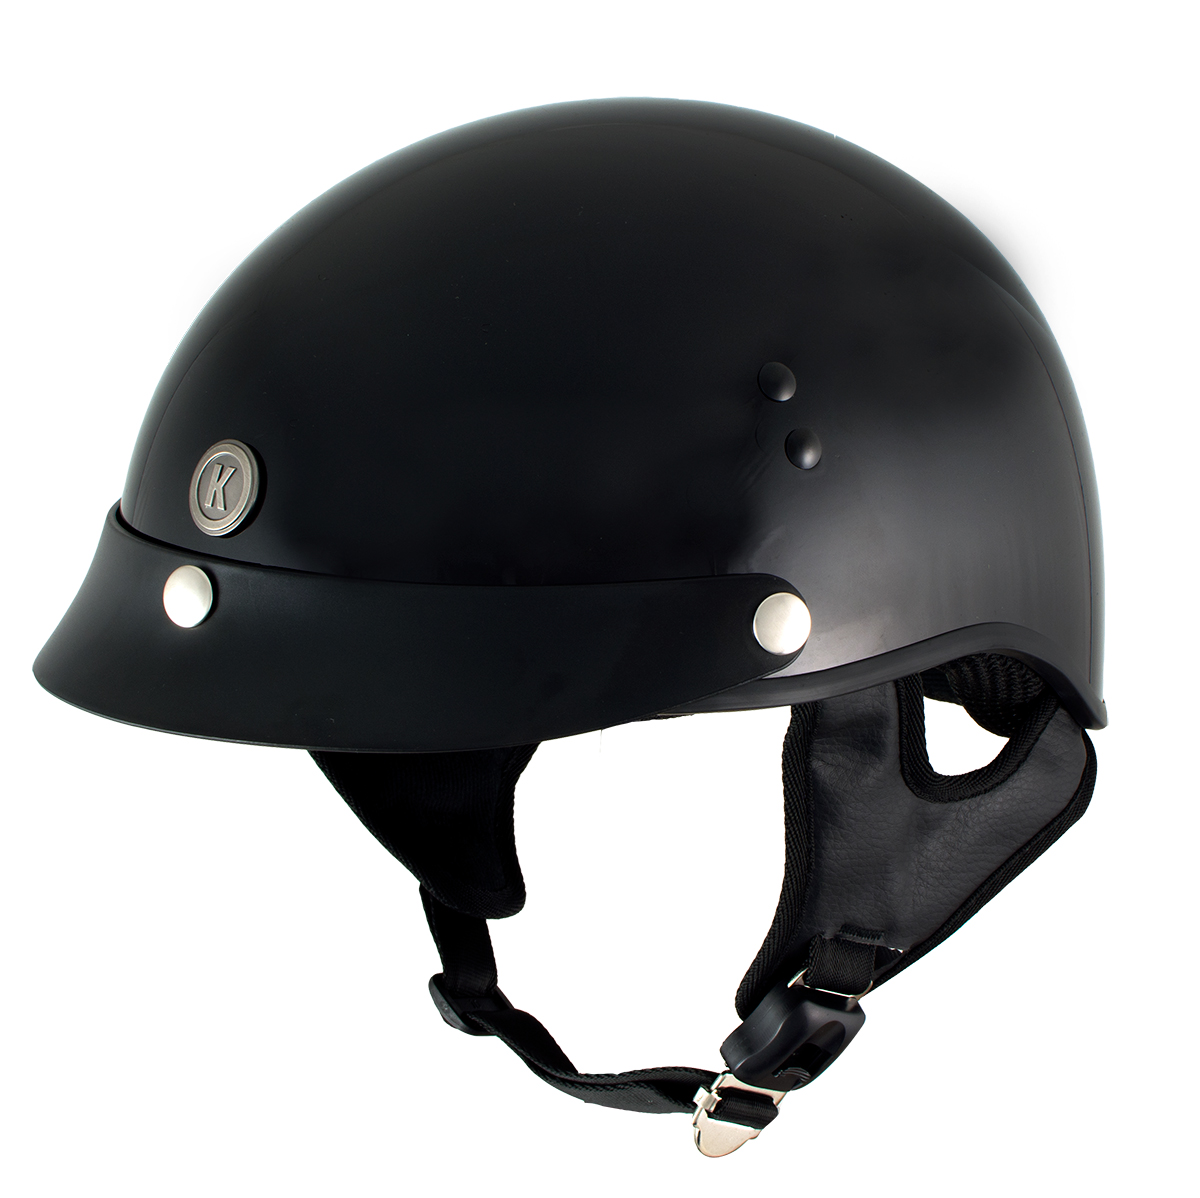 Klutch K-3 'Cruise' Gloss Black Half Face Motorcycle Helmet with Snap On Visor Small - image 1 of 11